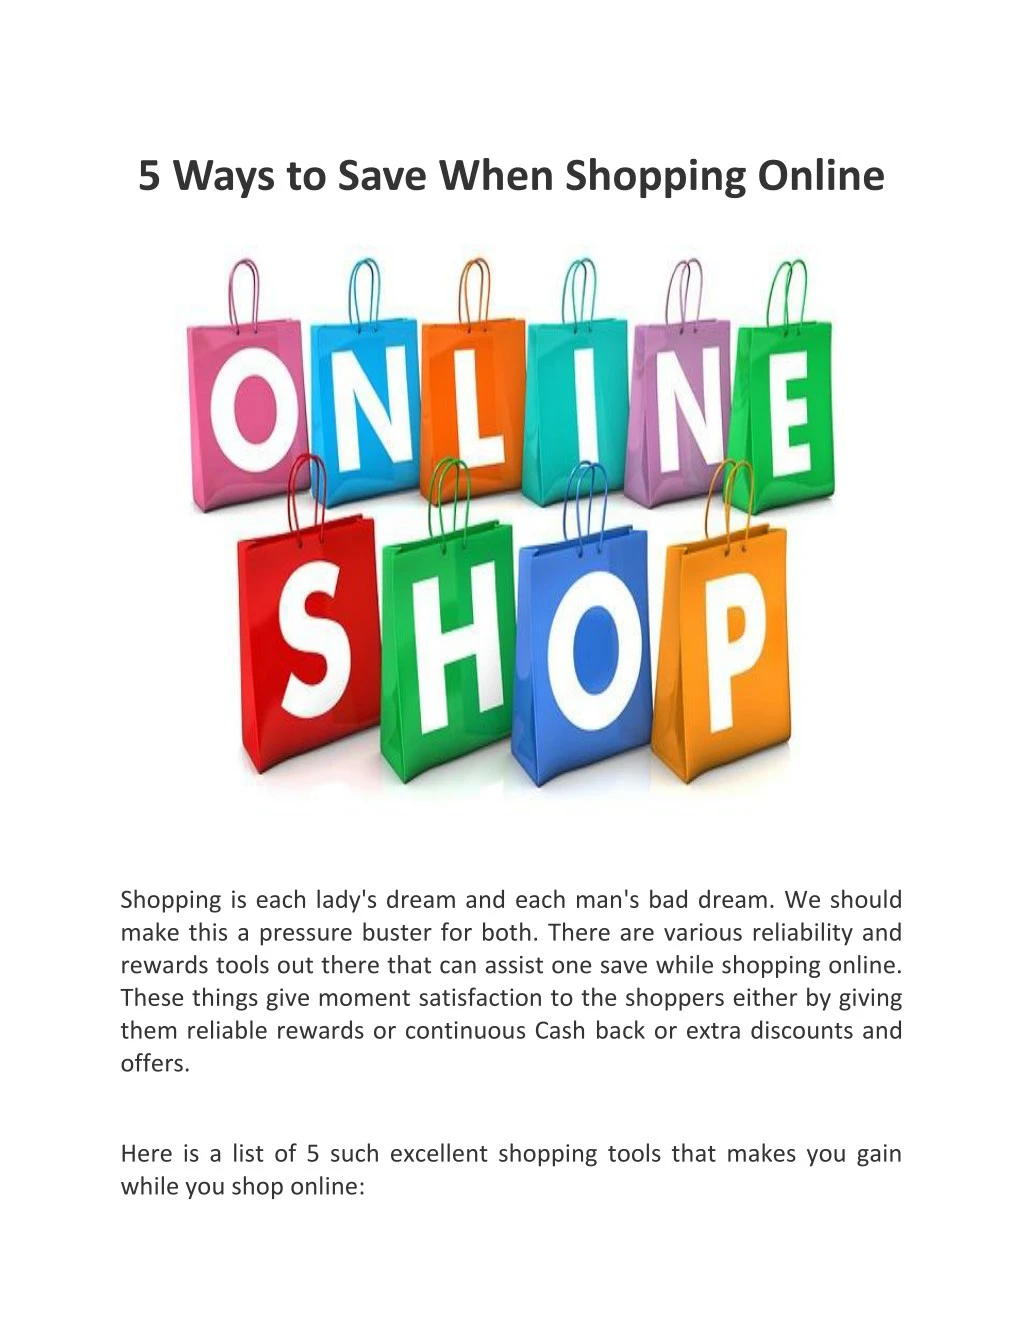 5 ways to save when shopping online